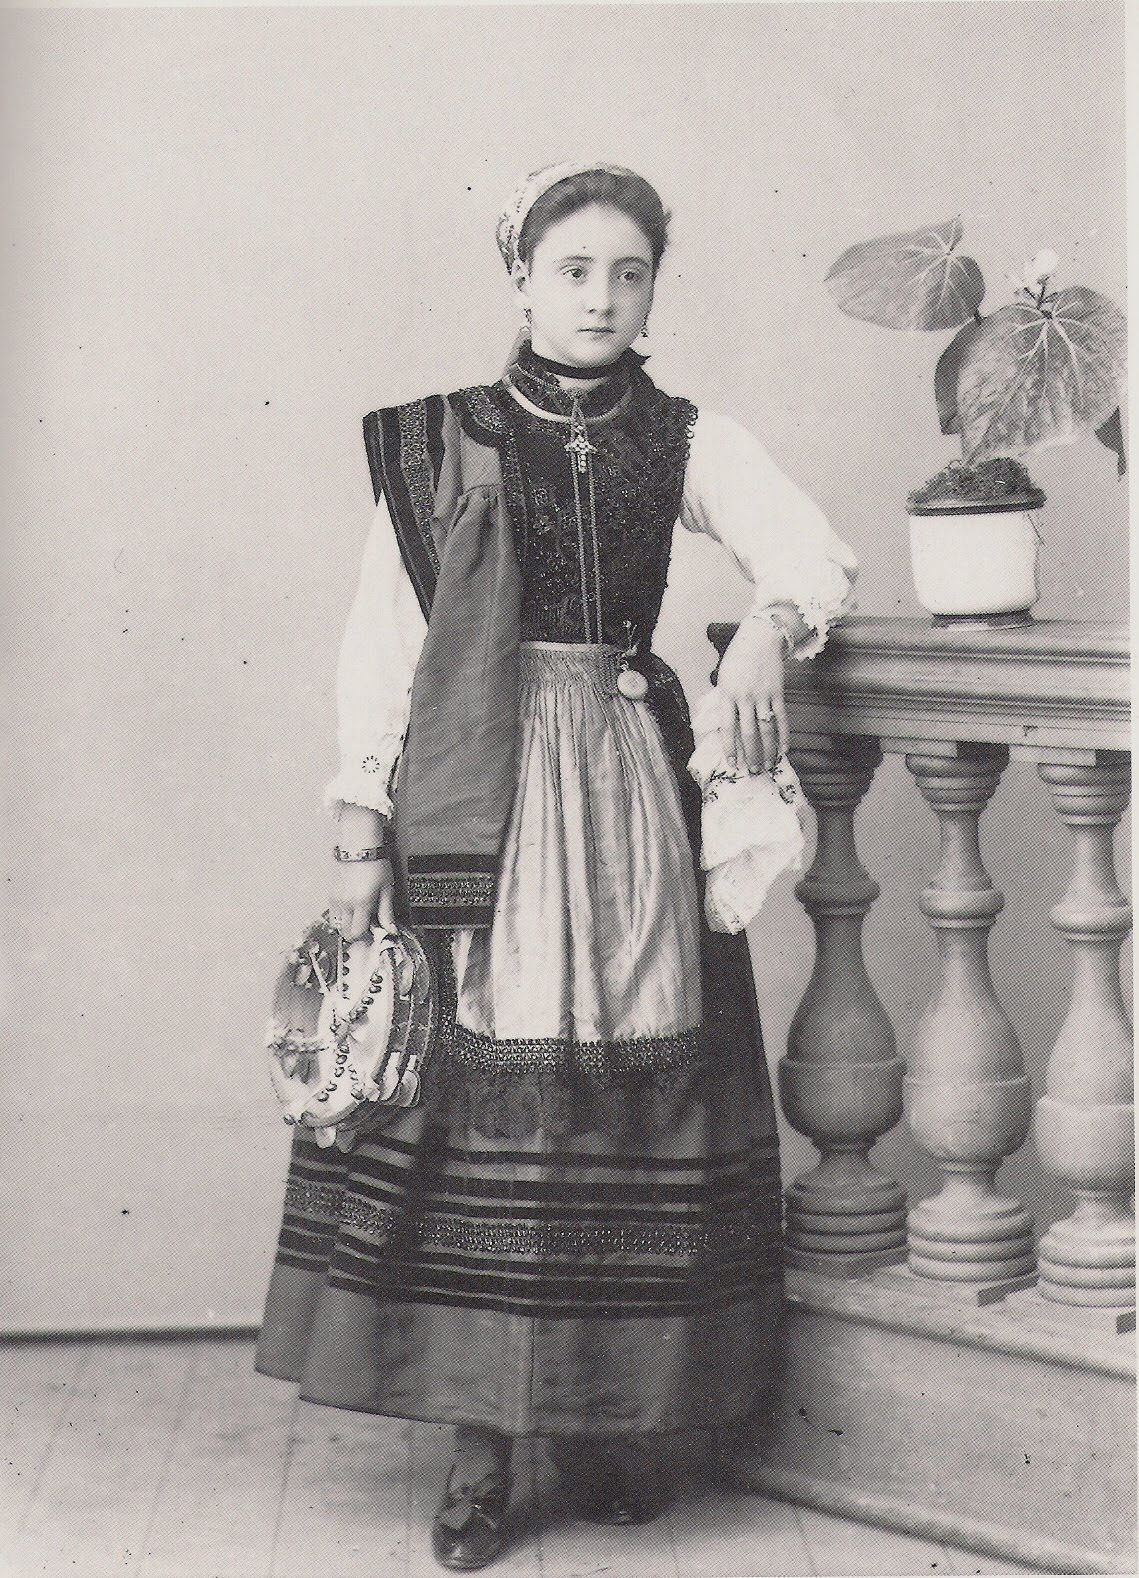 A woman from Hungary in 1898.